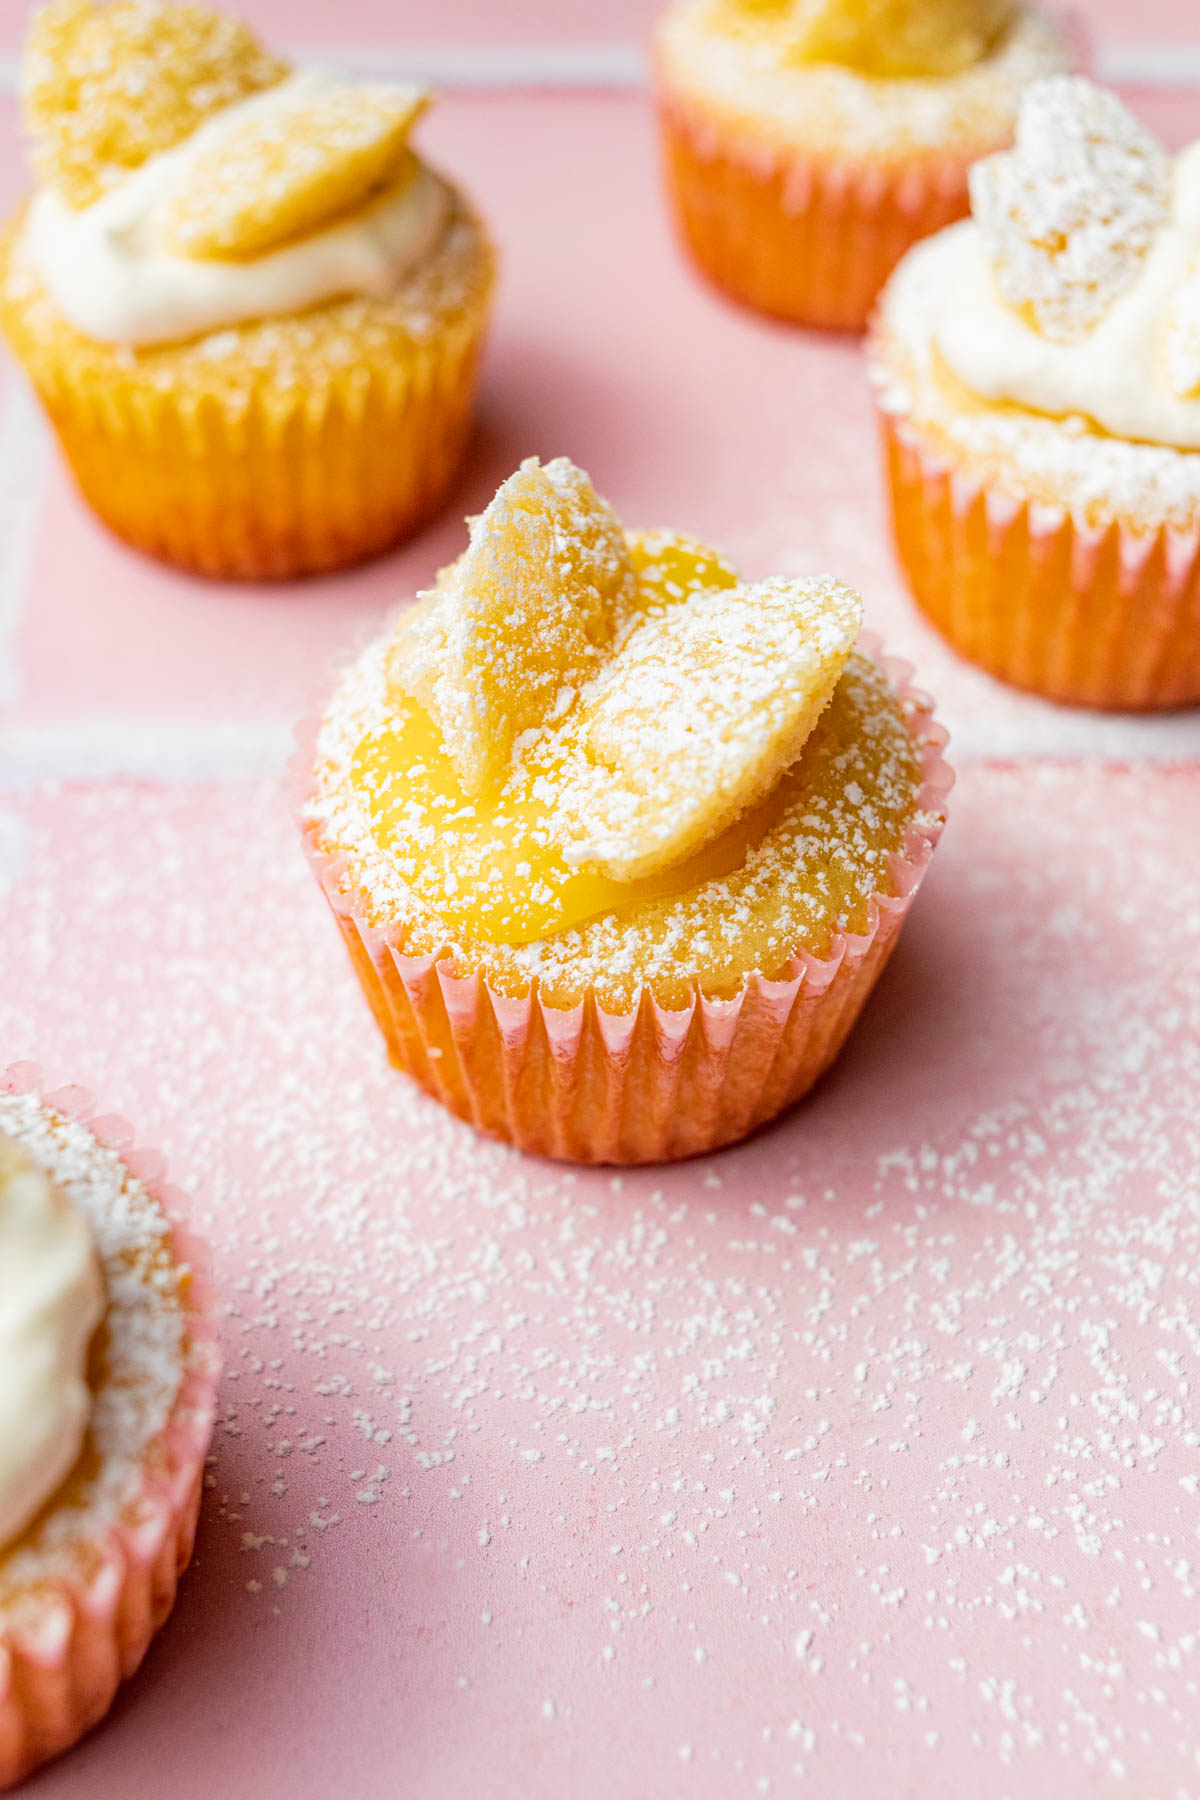 Cupcakes filled with lemon curd, close up.